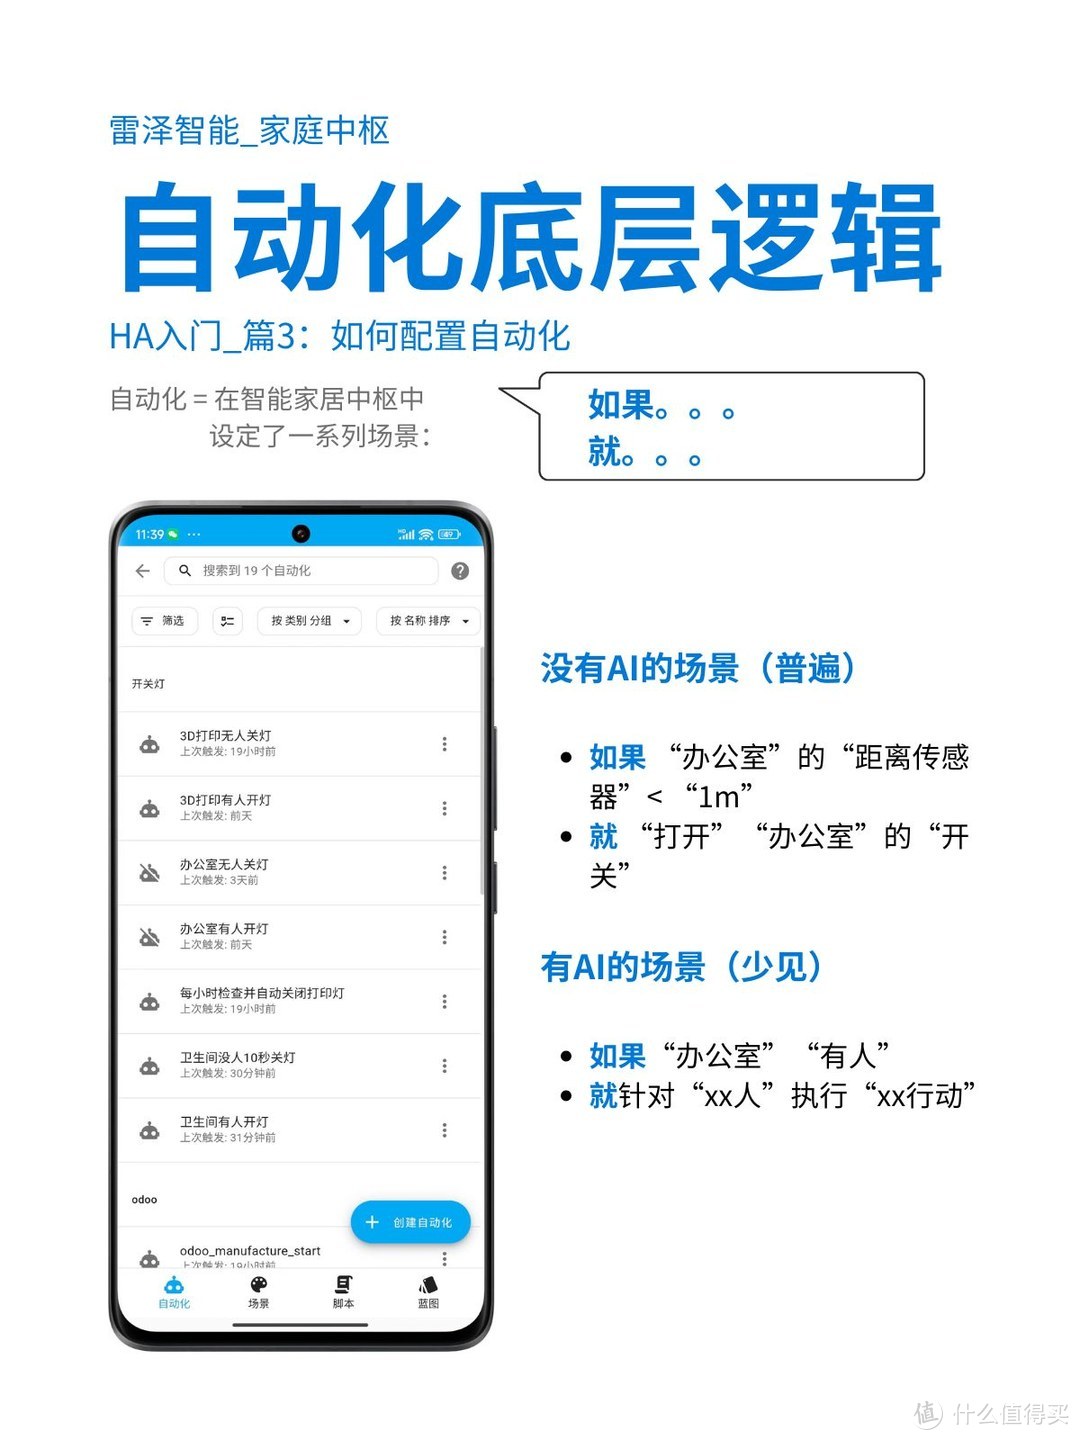 HomeAssistant入门_篇4：如何配置自动化